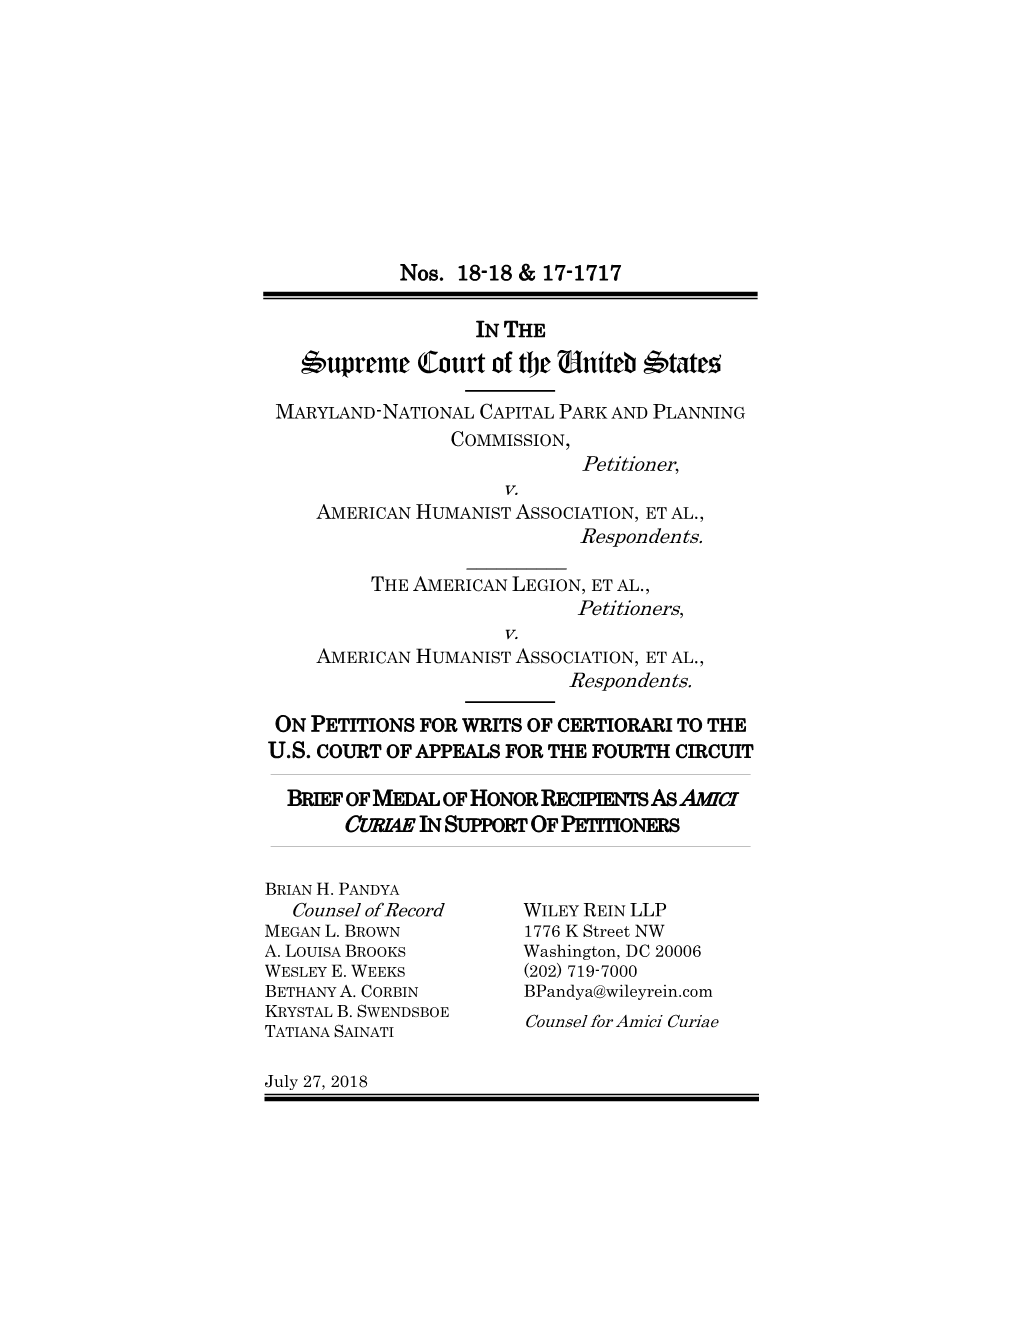 Brief of Medal of Honor Recipients As Amici Curiae in Support of Petitioners